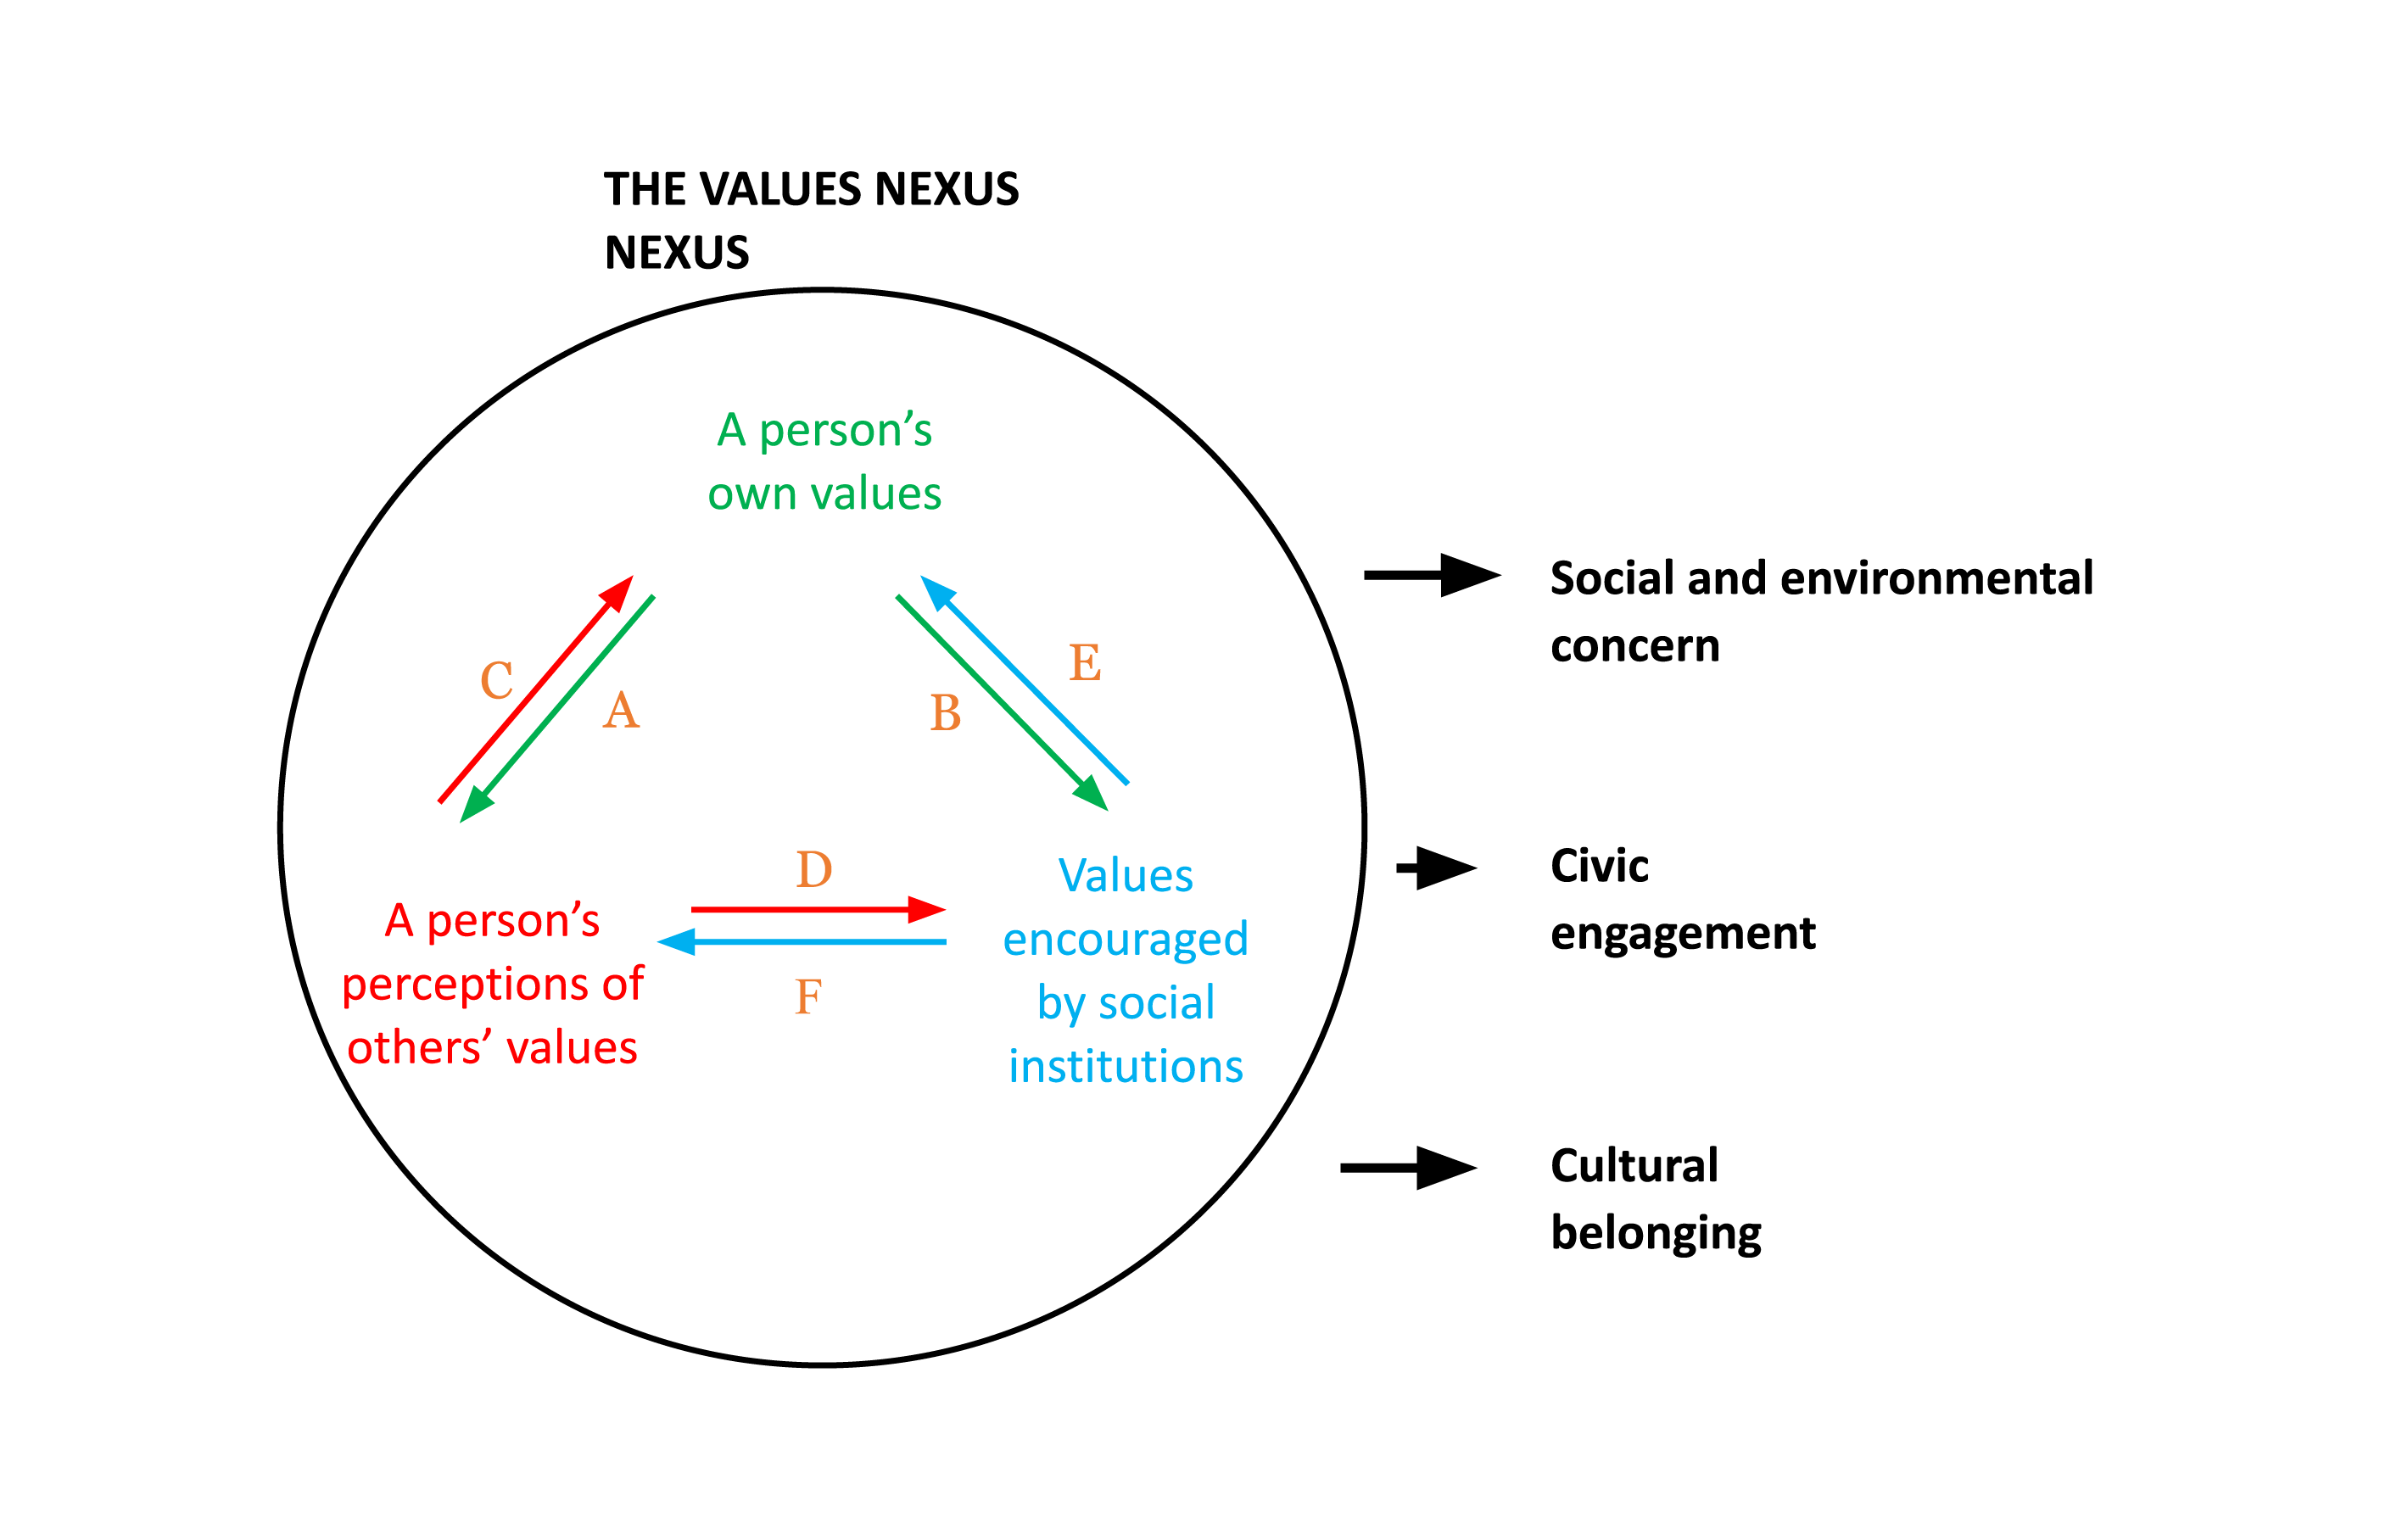 A diagram describing the values nexus. A circle encompasses a person's values, values encouraged by social institutions, and a person's perceptions of others' values — all of which are connection. These values then point to social and environmental concern, civic engagement, and cultural belonging.